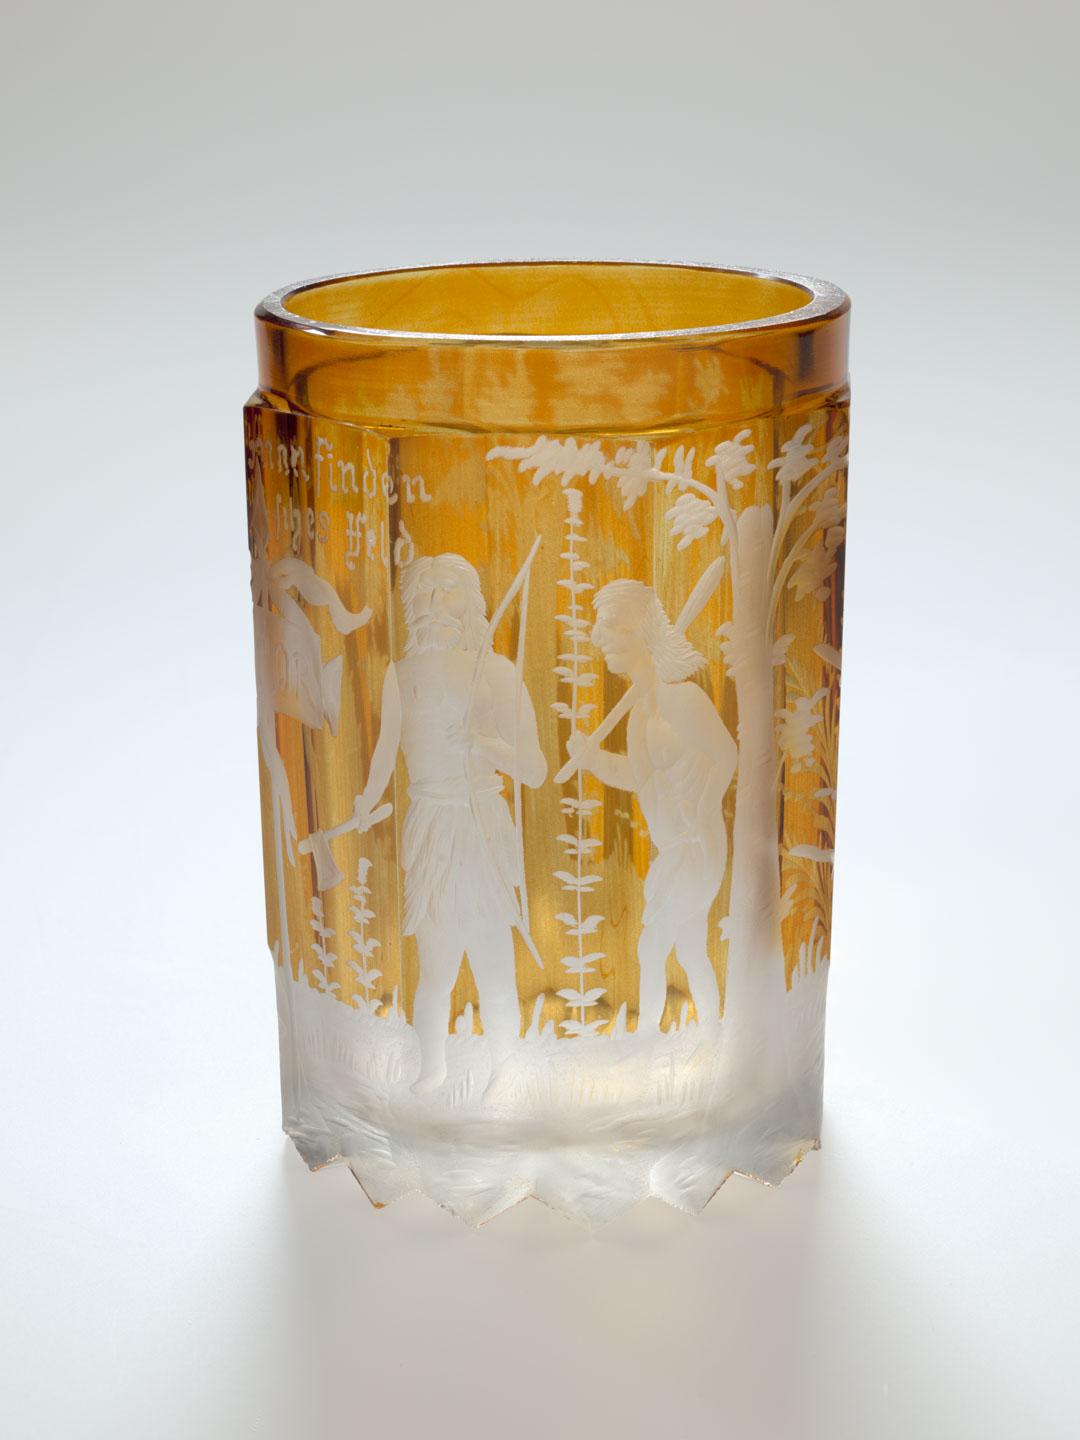 Artwork Beaker this artwork made of Clear glass painted yellow and engraved with a primitive scene of a male figure and a hut in a landscape, created in 1840-01-01